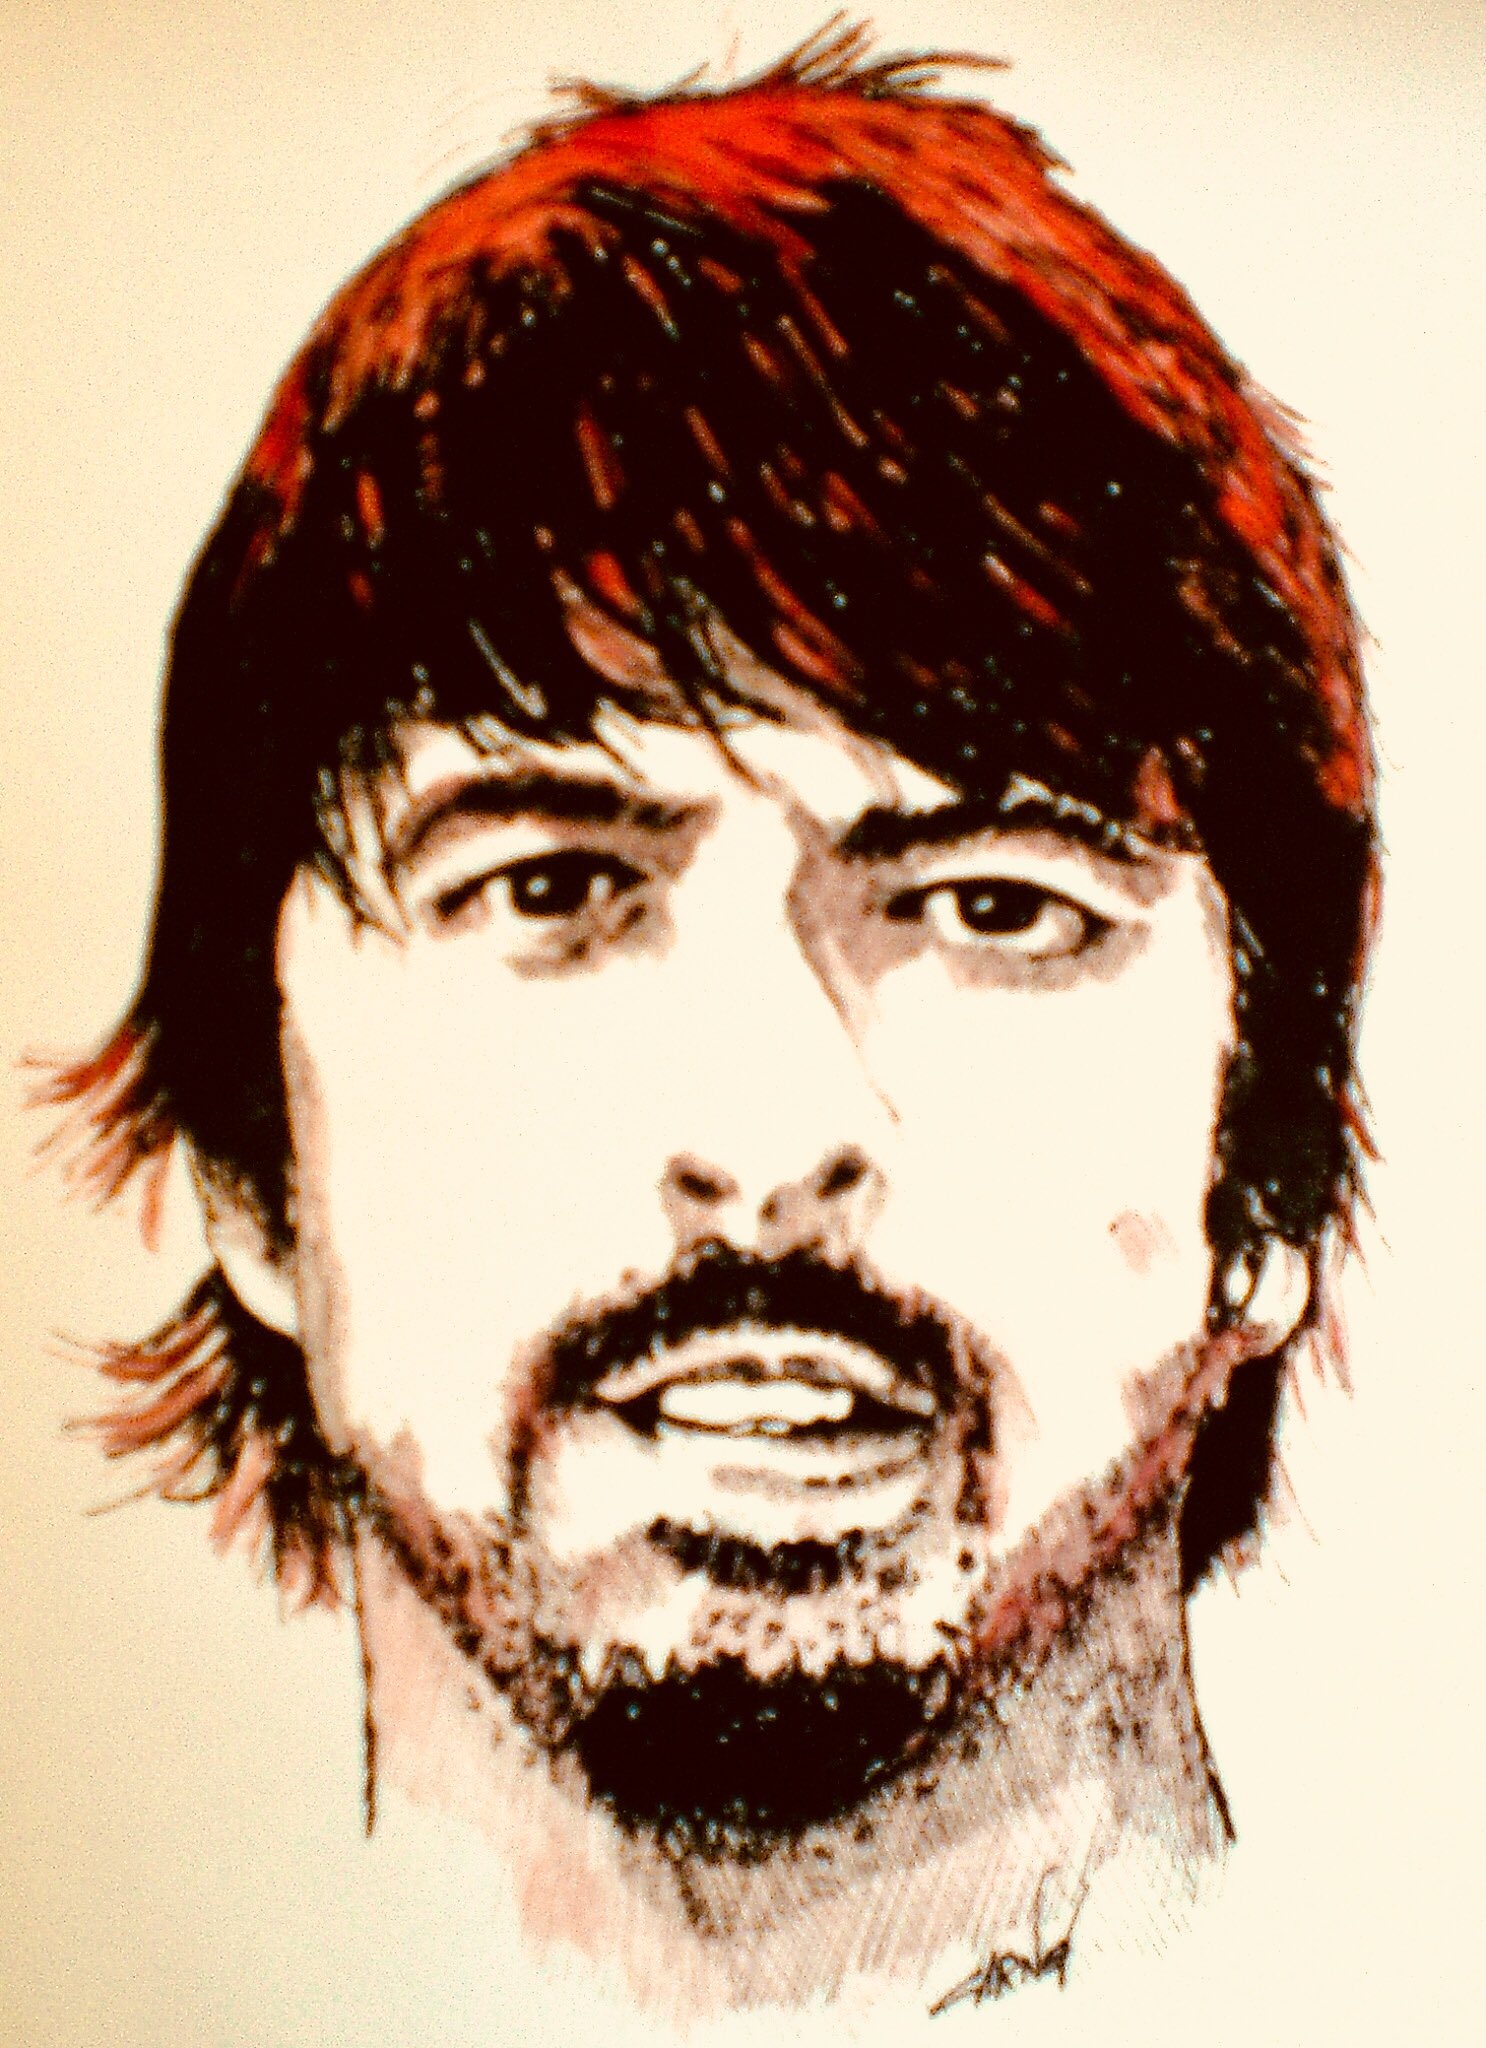 Happy birthday Dave Grohl! 